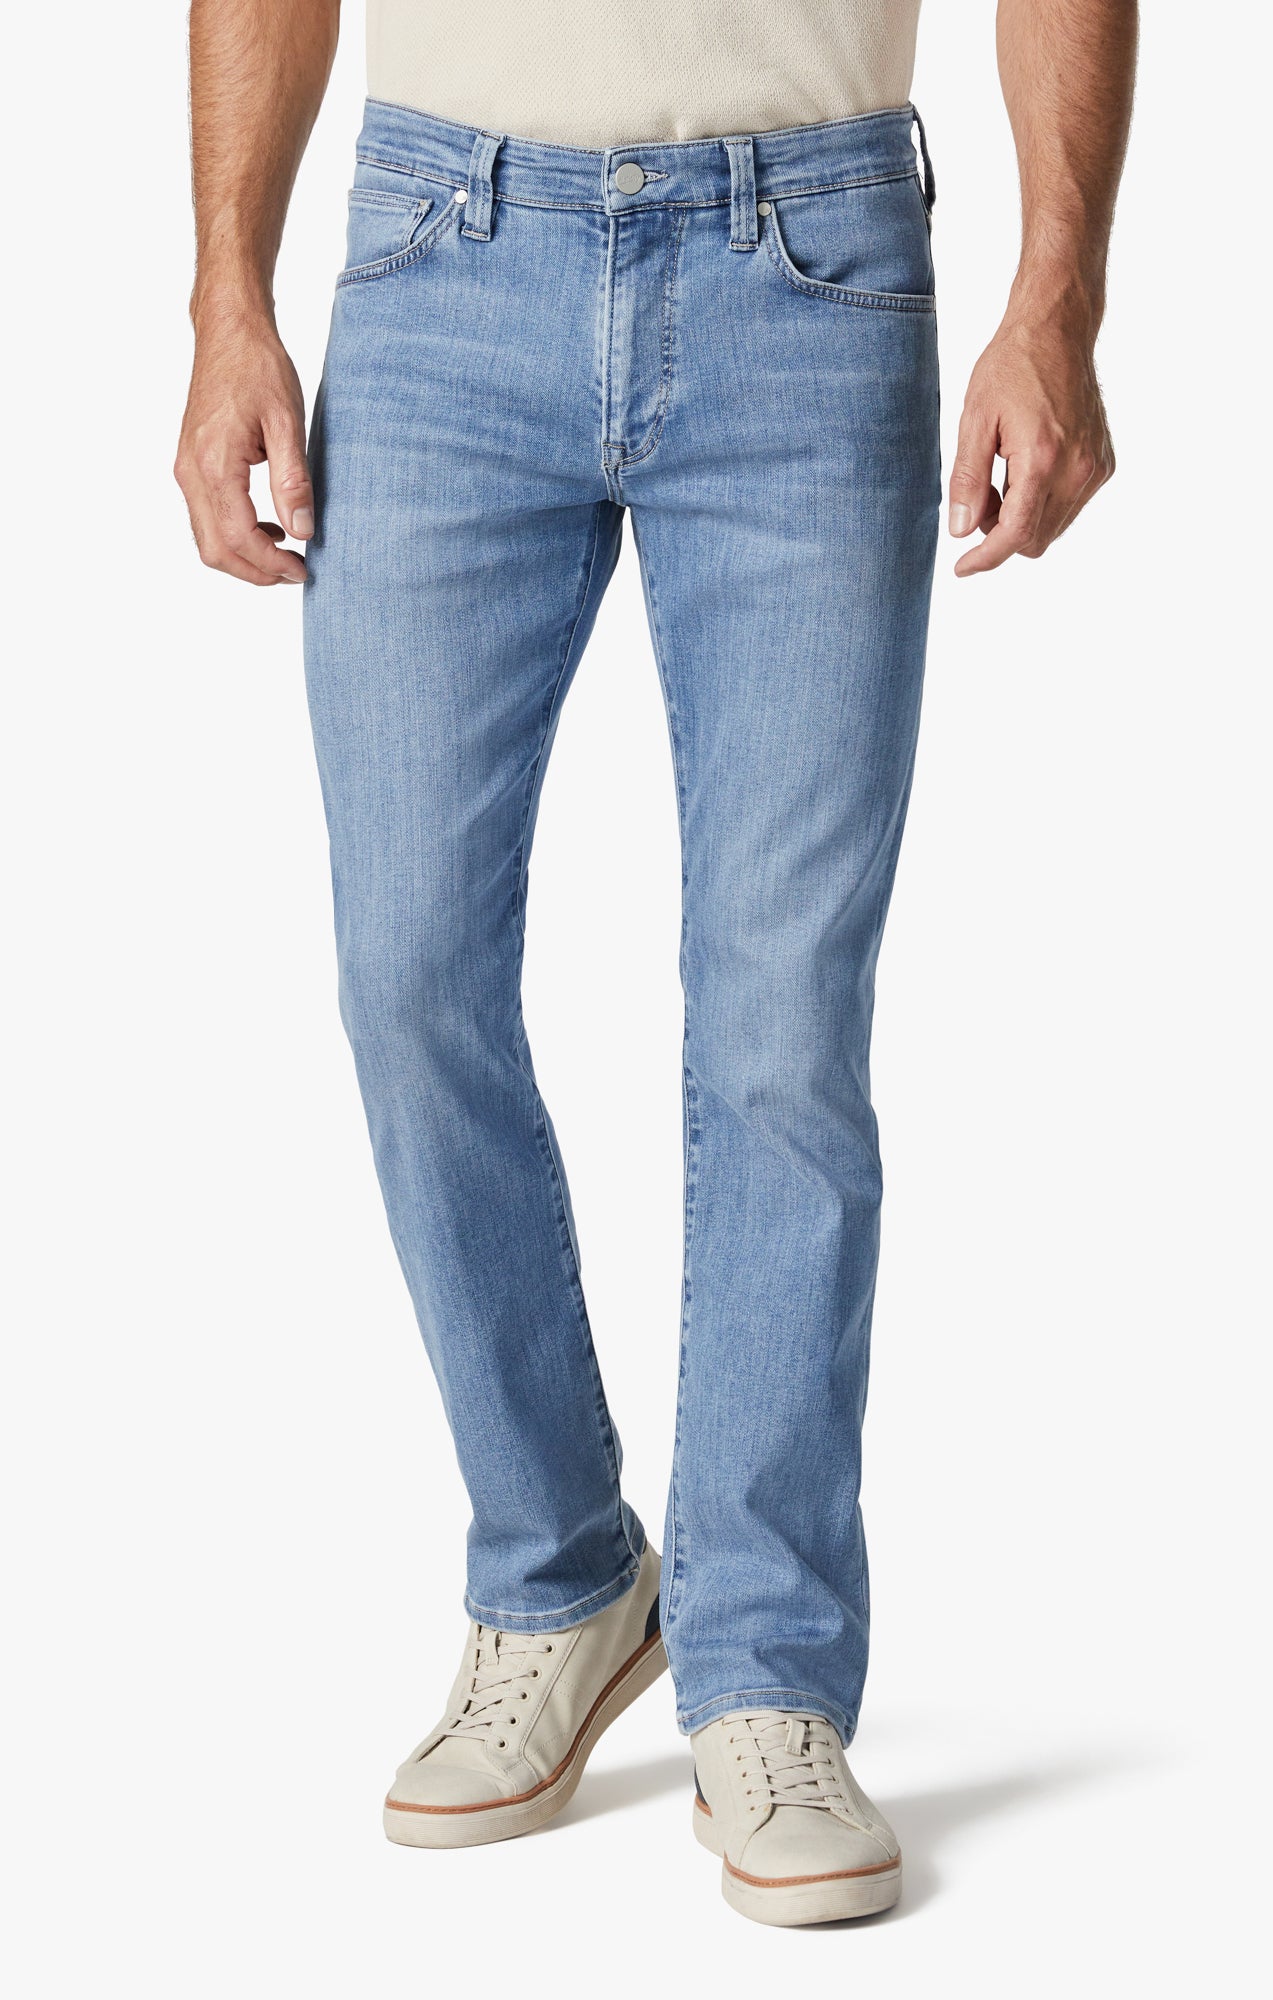 Courage Straight Leg Jeans In Light Brushed Urban Image 2